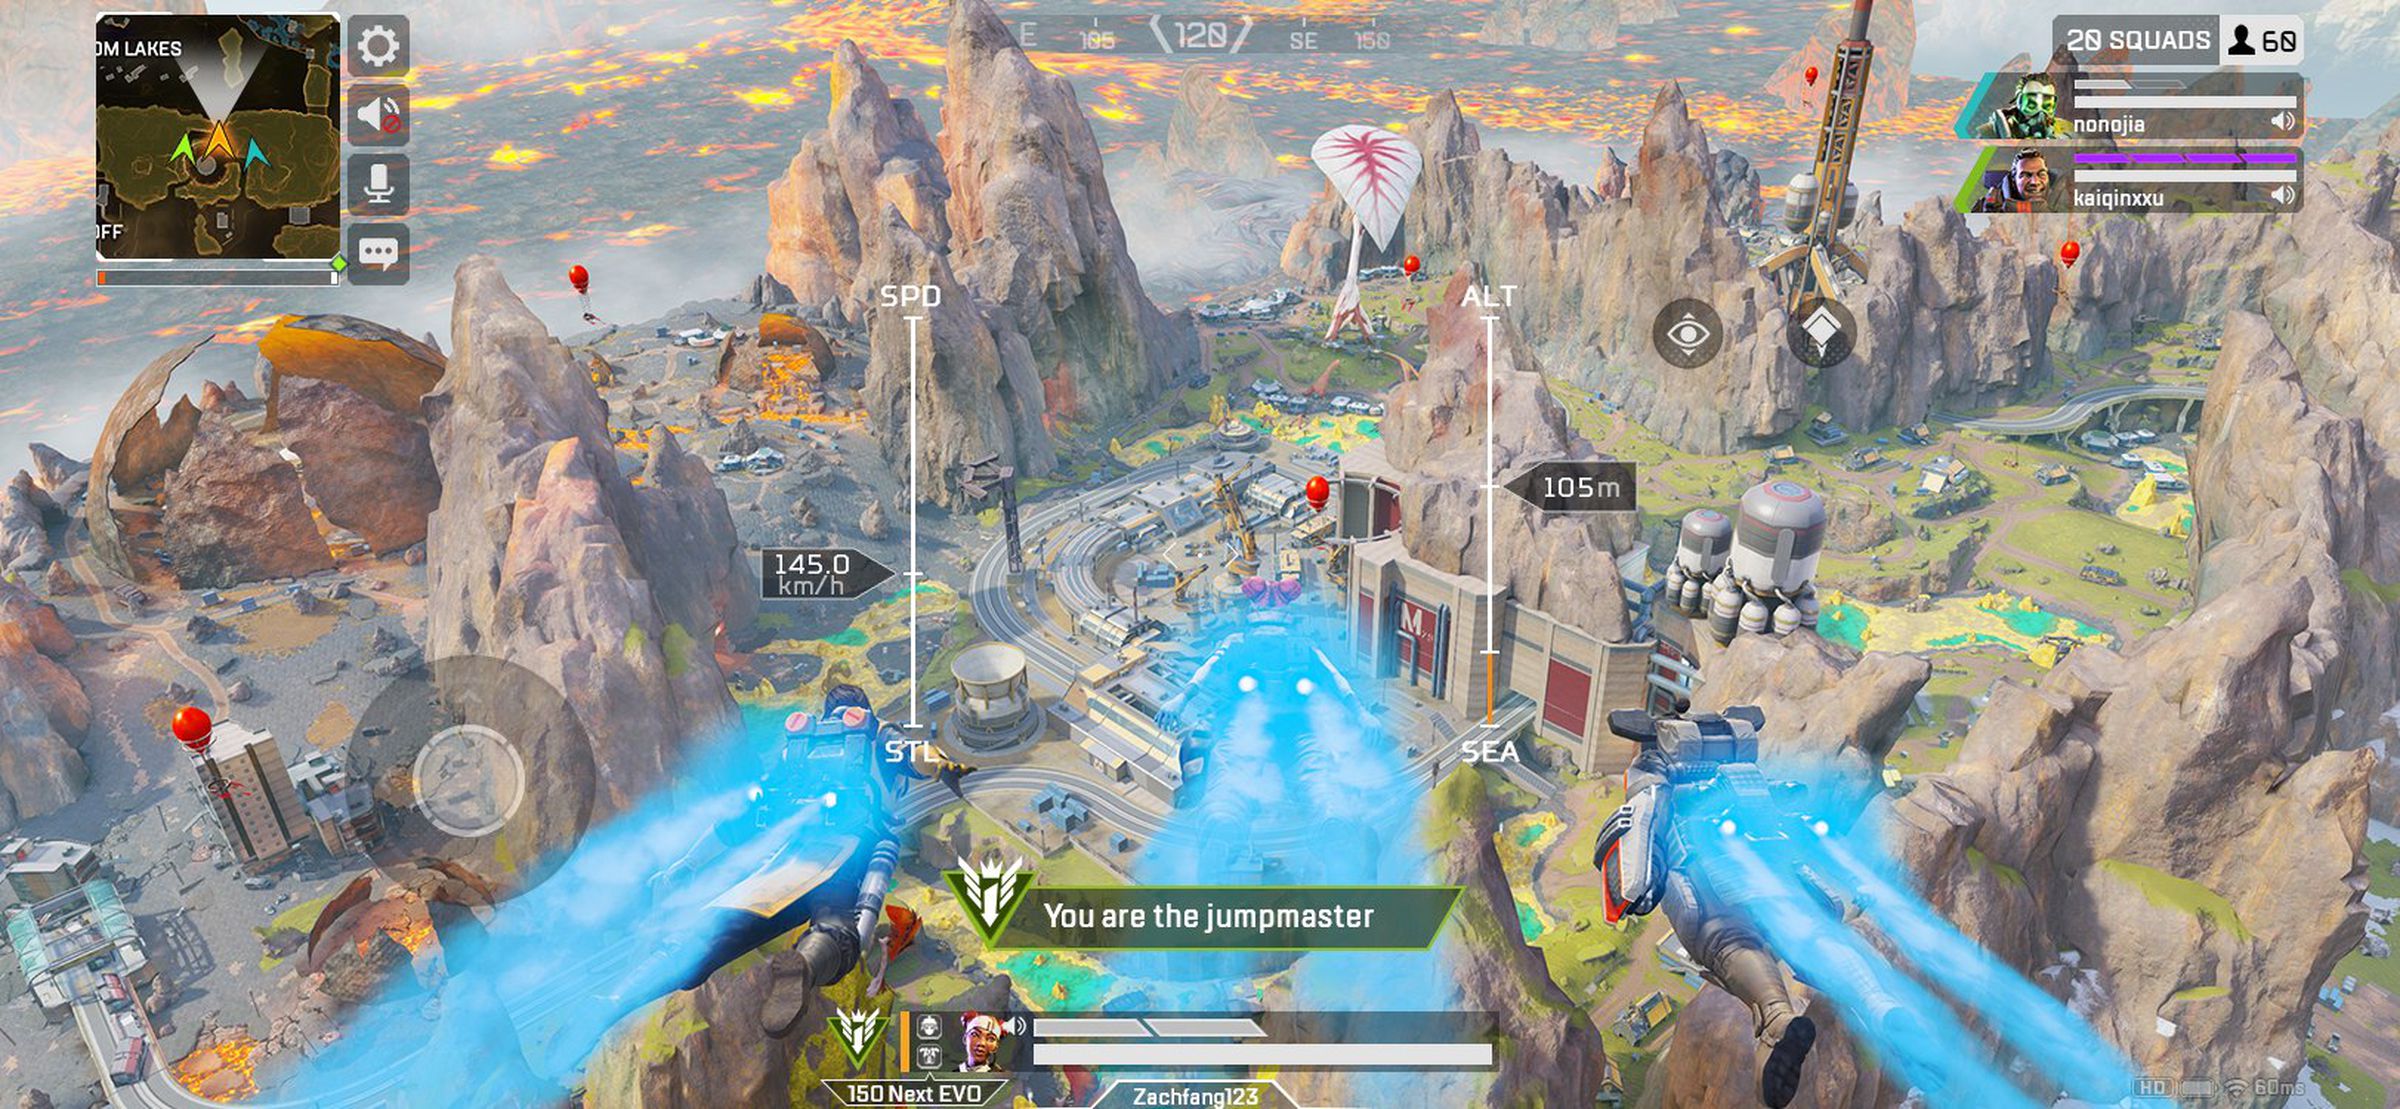 Screenshot of Apex Legends Mobile: A river flows through a rocky landscape; a caption reads “You are the jumpmaster.”